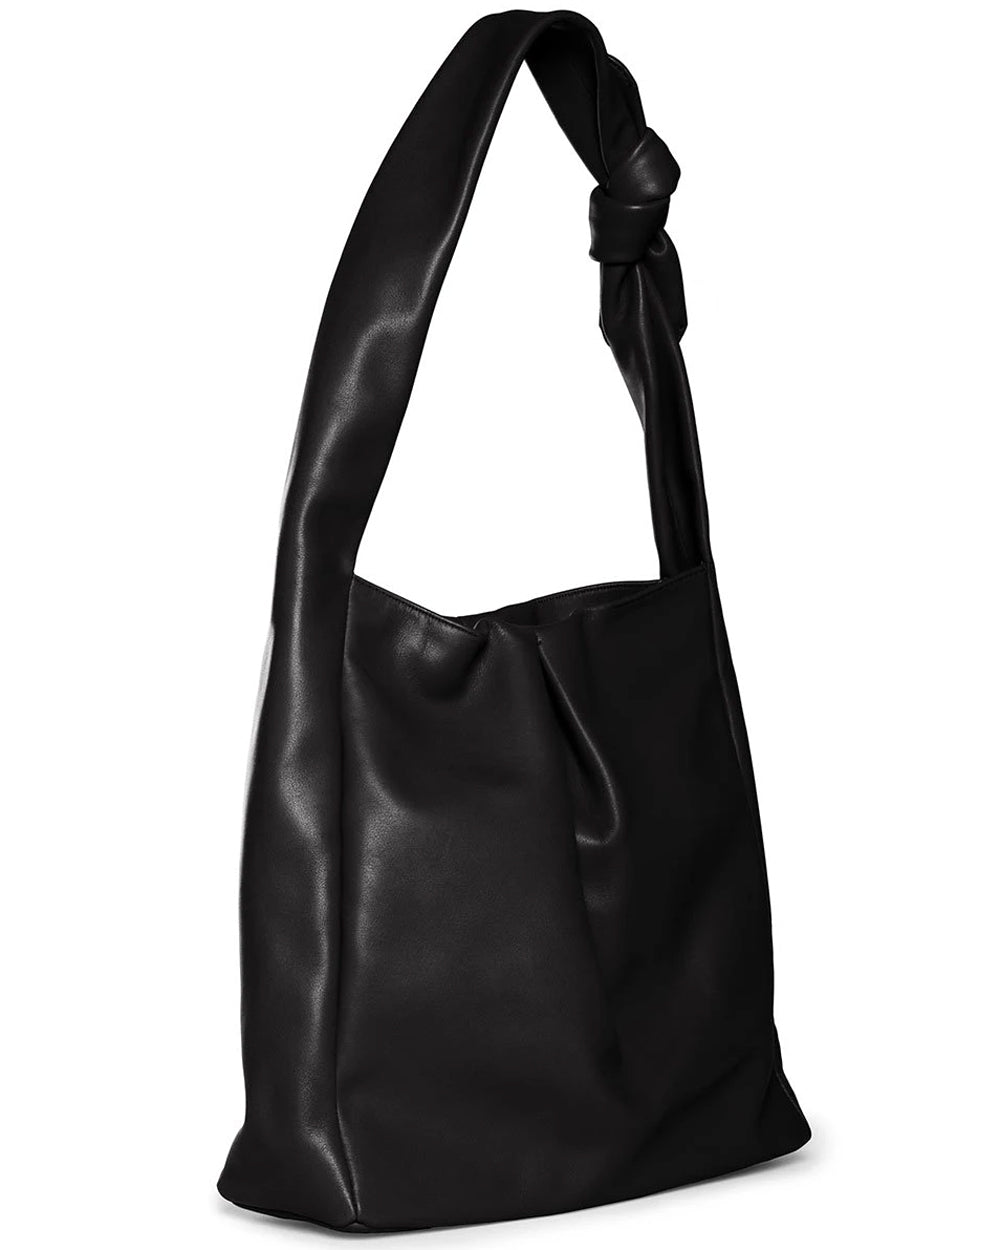 Black Island Knotted Tote